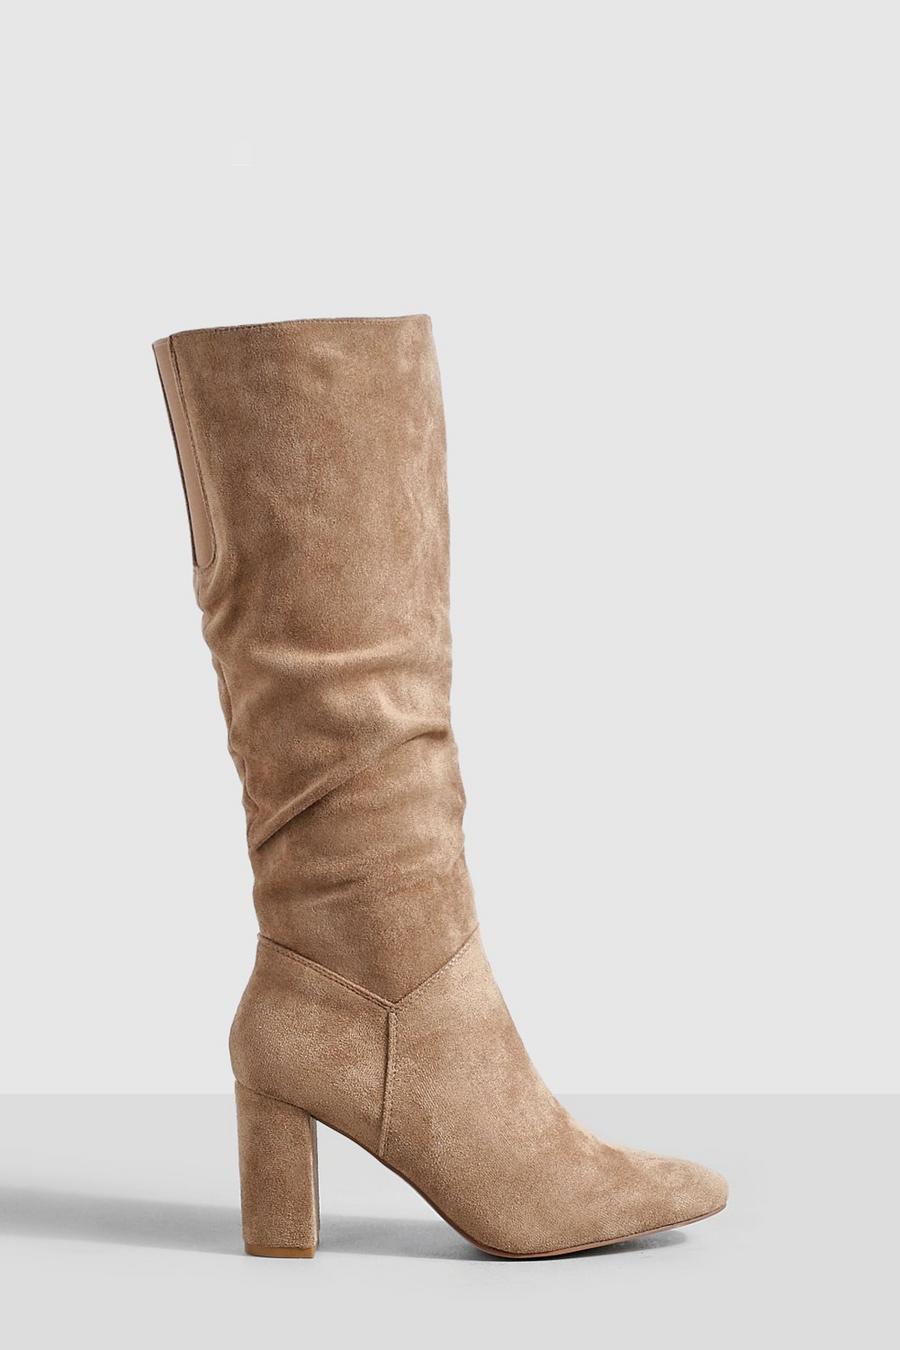 Taupe Slouchy Block Heel Knee High Boots